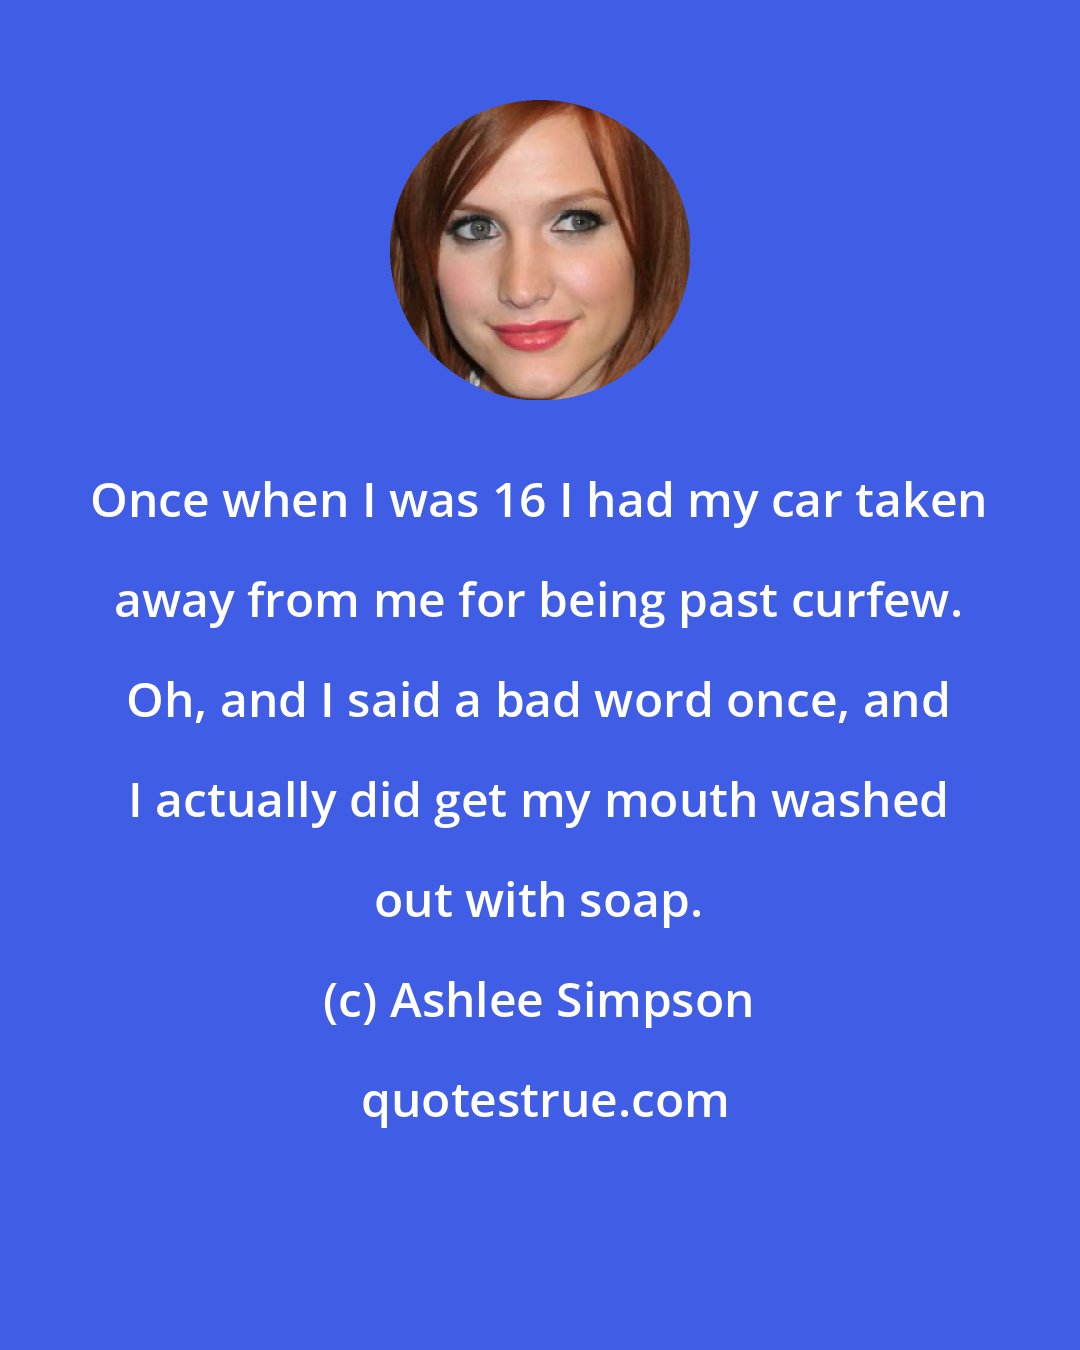 Ashlee Simpson: Once when I was 16 I had my car taken away from me for being past curfew. Oh, and I said a bad word once, and I actually did get my mouth washed out with soap.